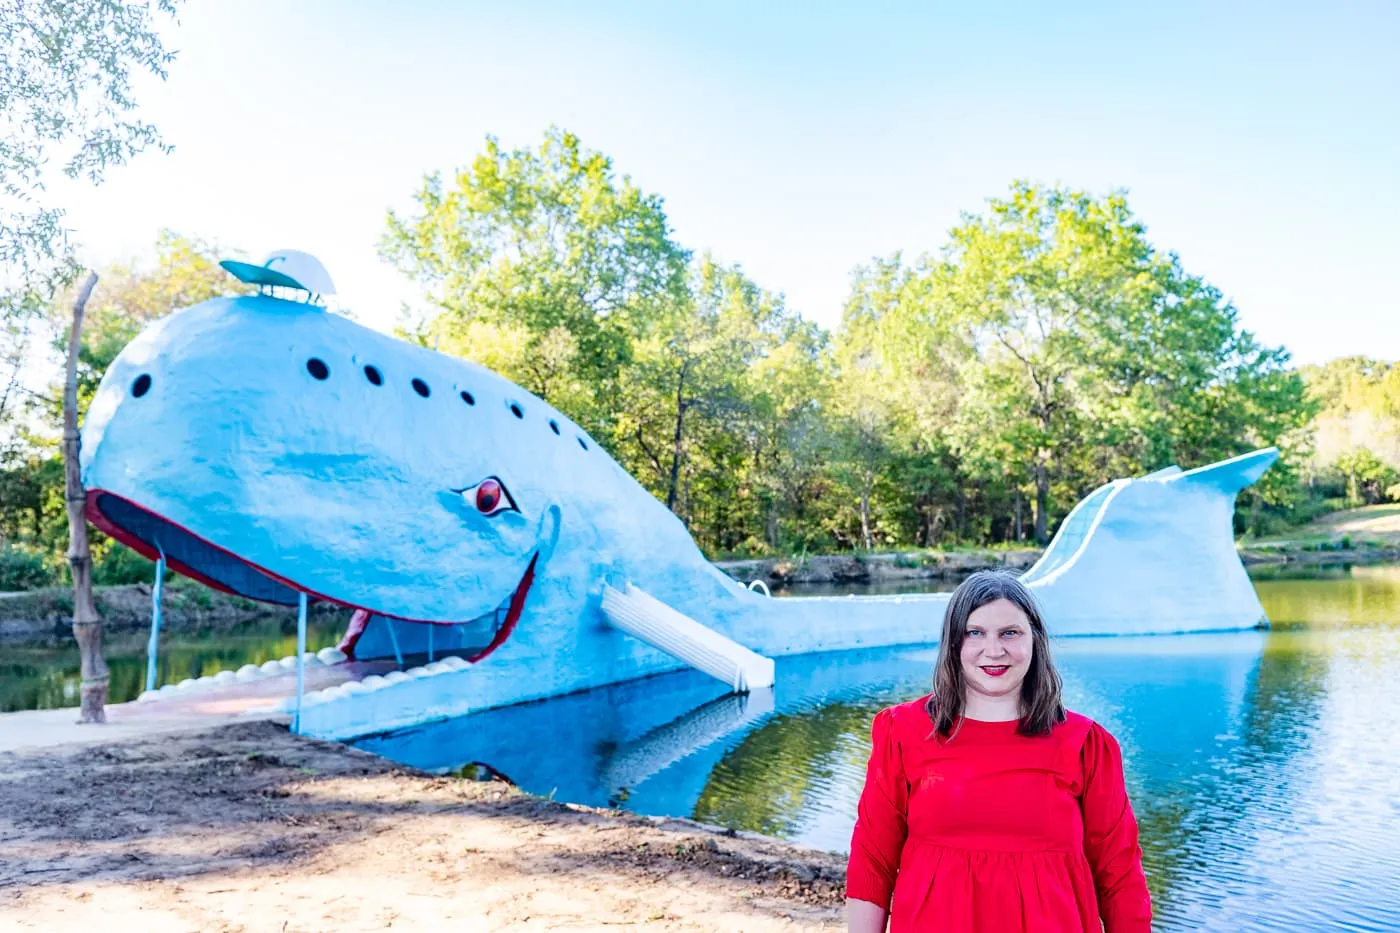 Blue Whale of Catoosa on Route 66 in Oklahoma - Route 66 Roadside Attraction